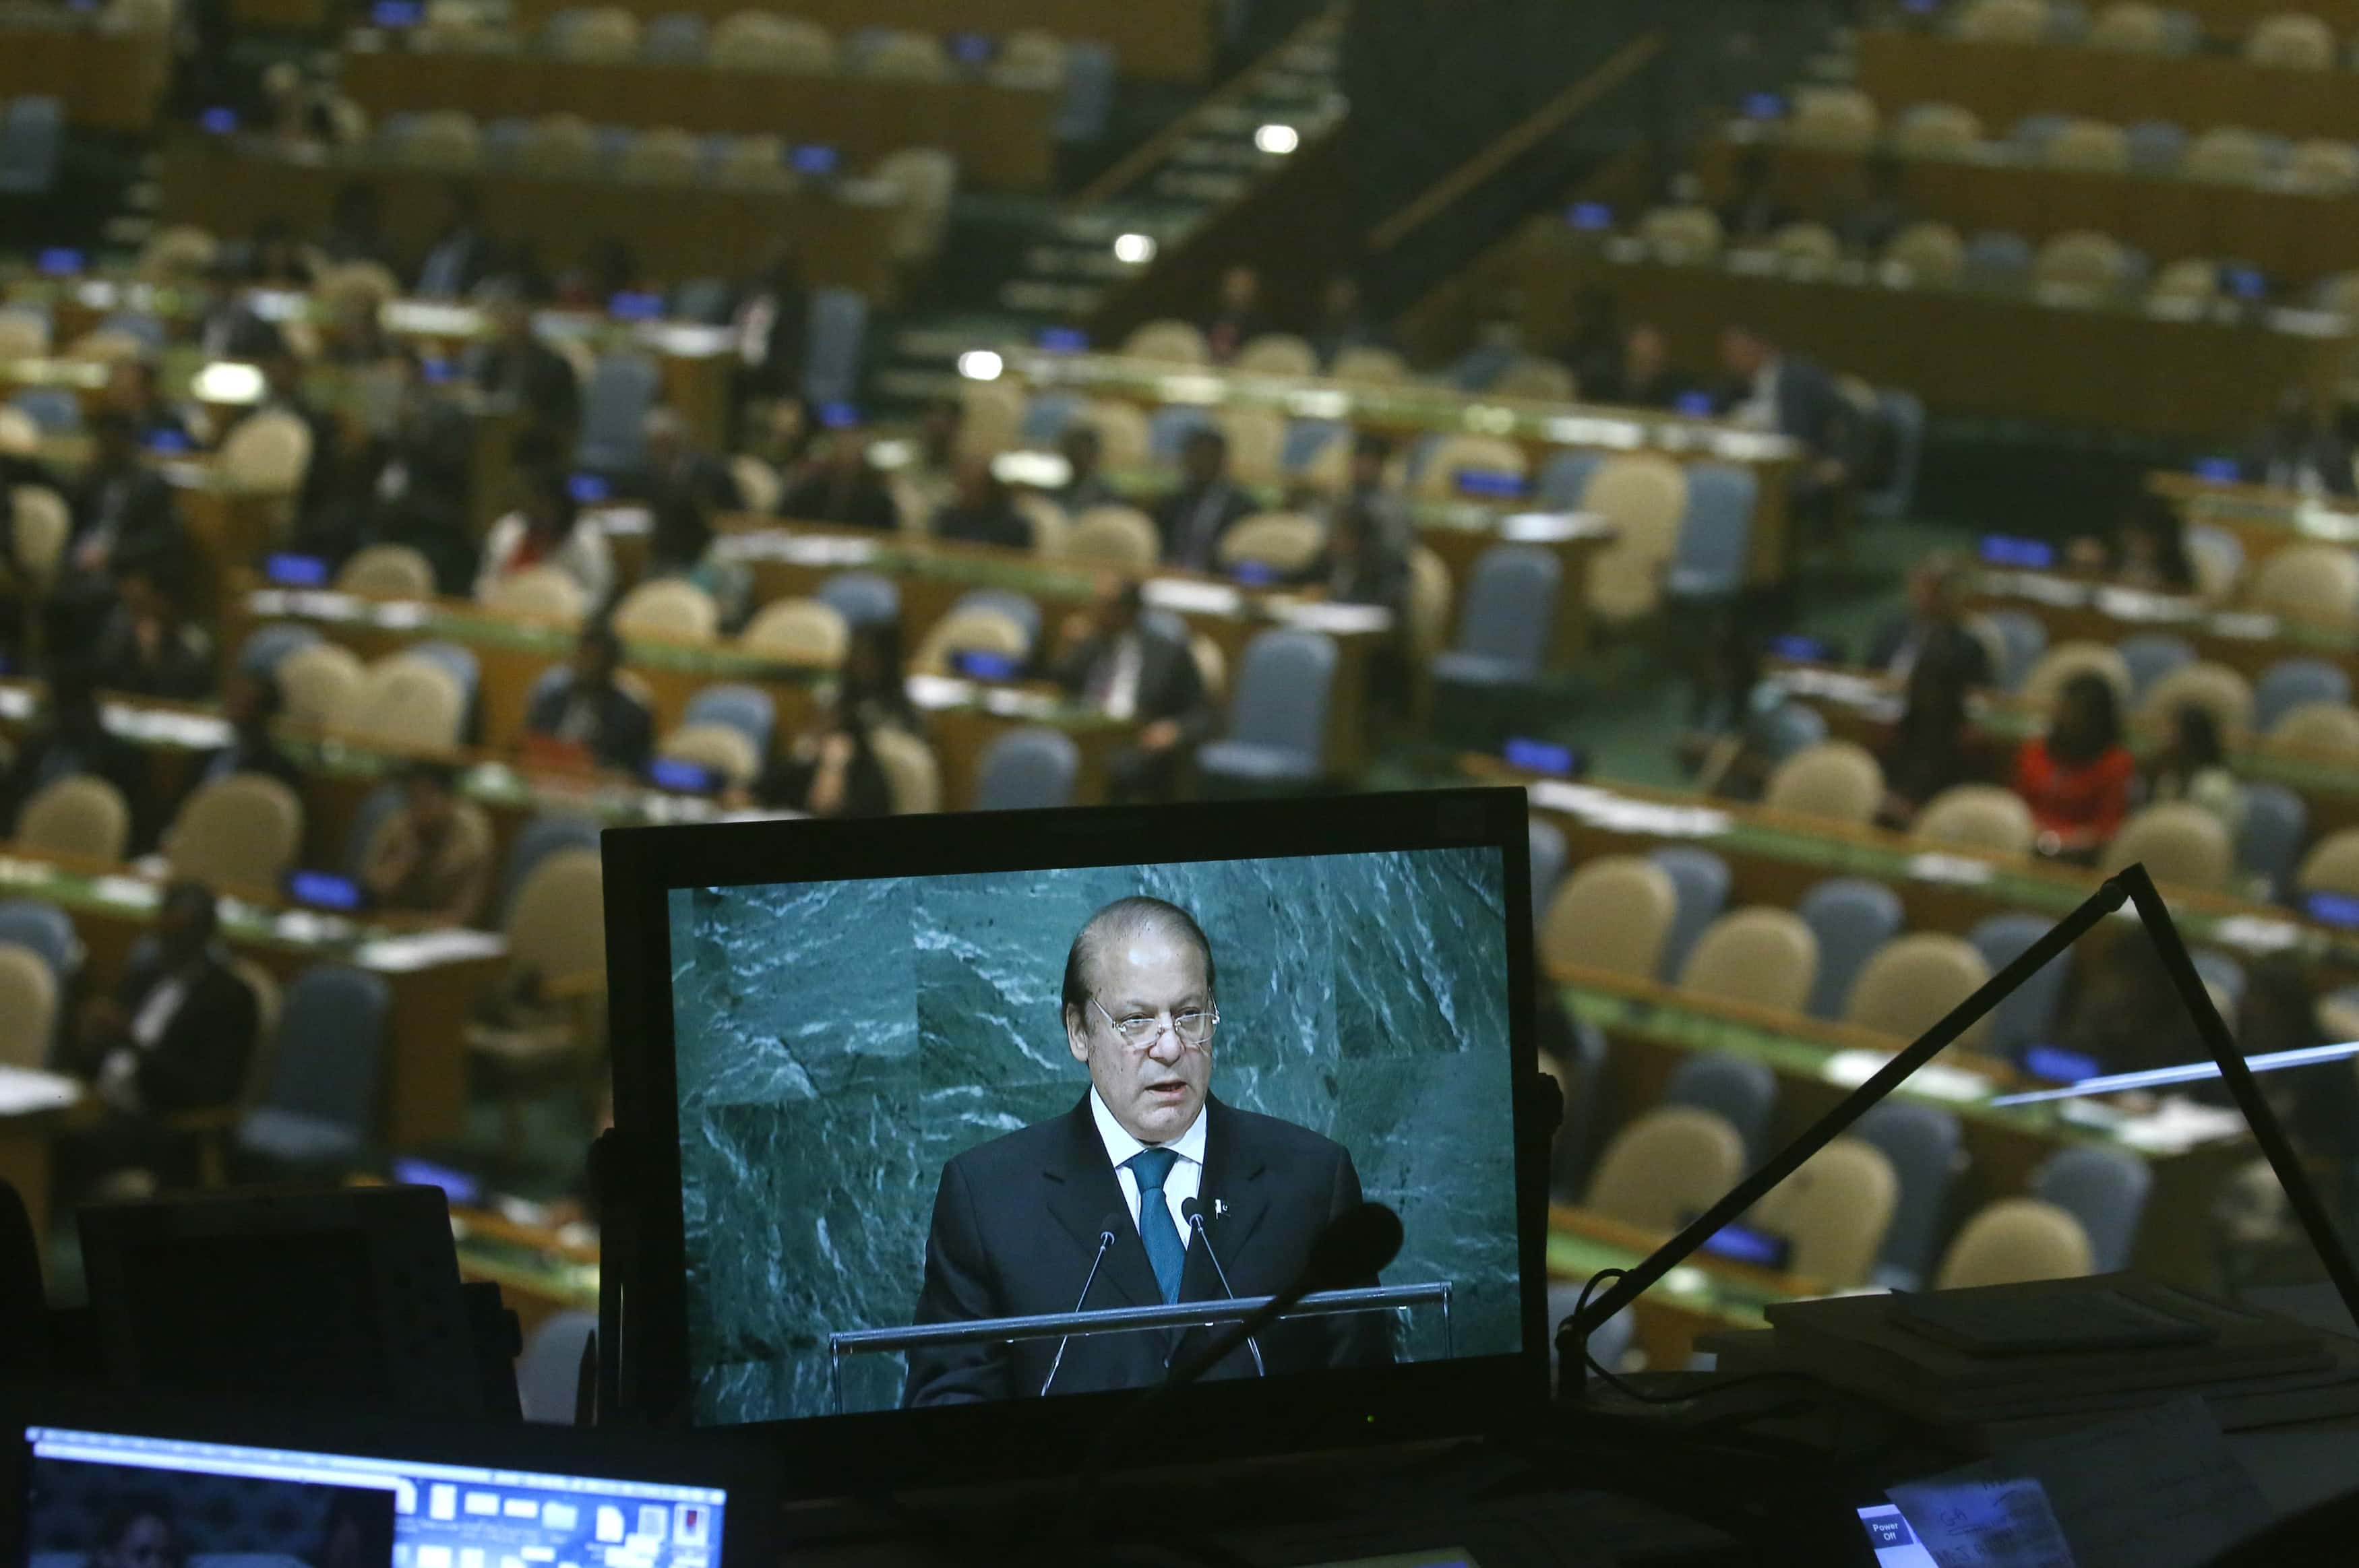 Prime Minister Nawaz Sharif of Pakistan is seen on a monitor as he addresses the United Nations General Assembly in New York, U.S., 21 September 2016, REUTERS/Carlo Allegri